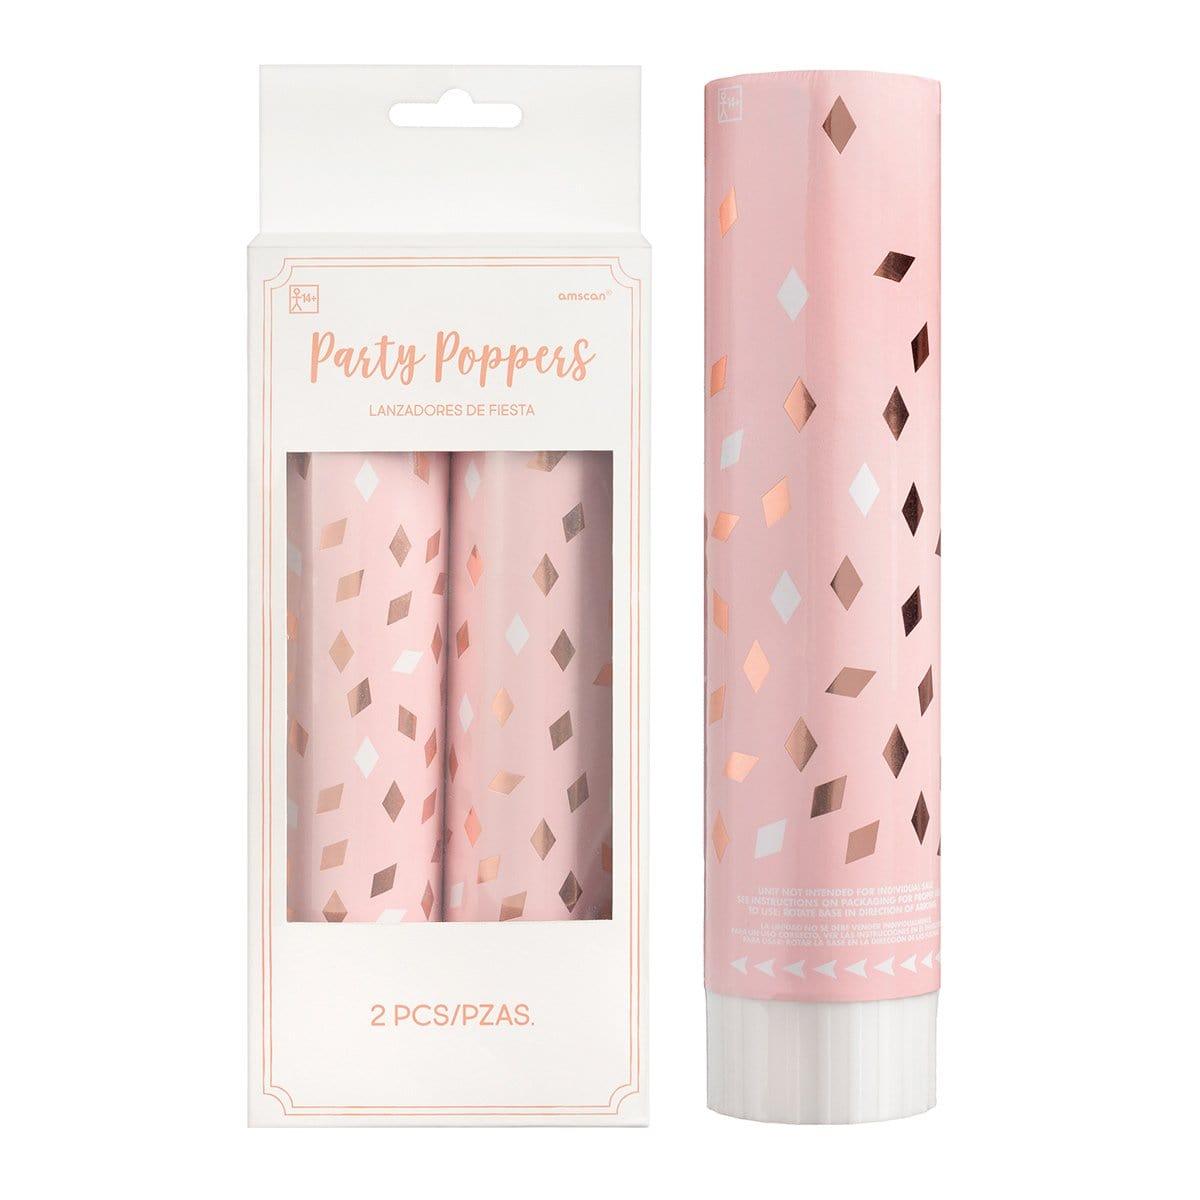 Buy General Birthday Blush Birthday - Confetti Poppers, 2 Count sold at Party Expert